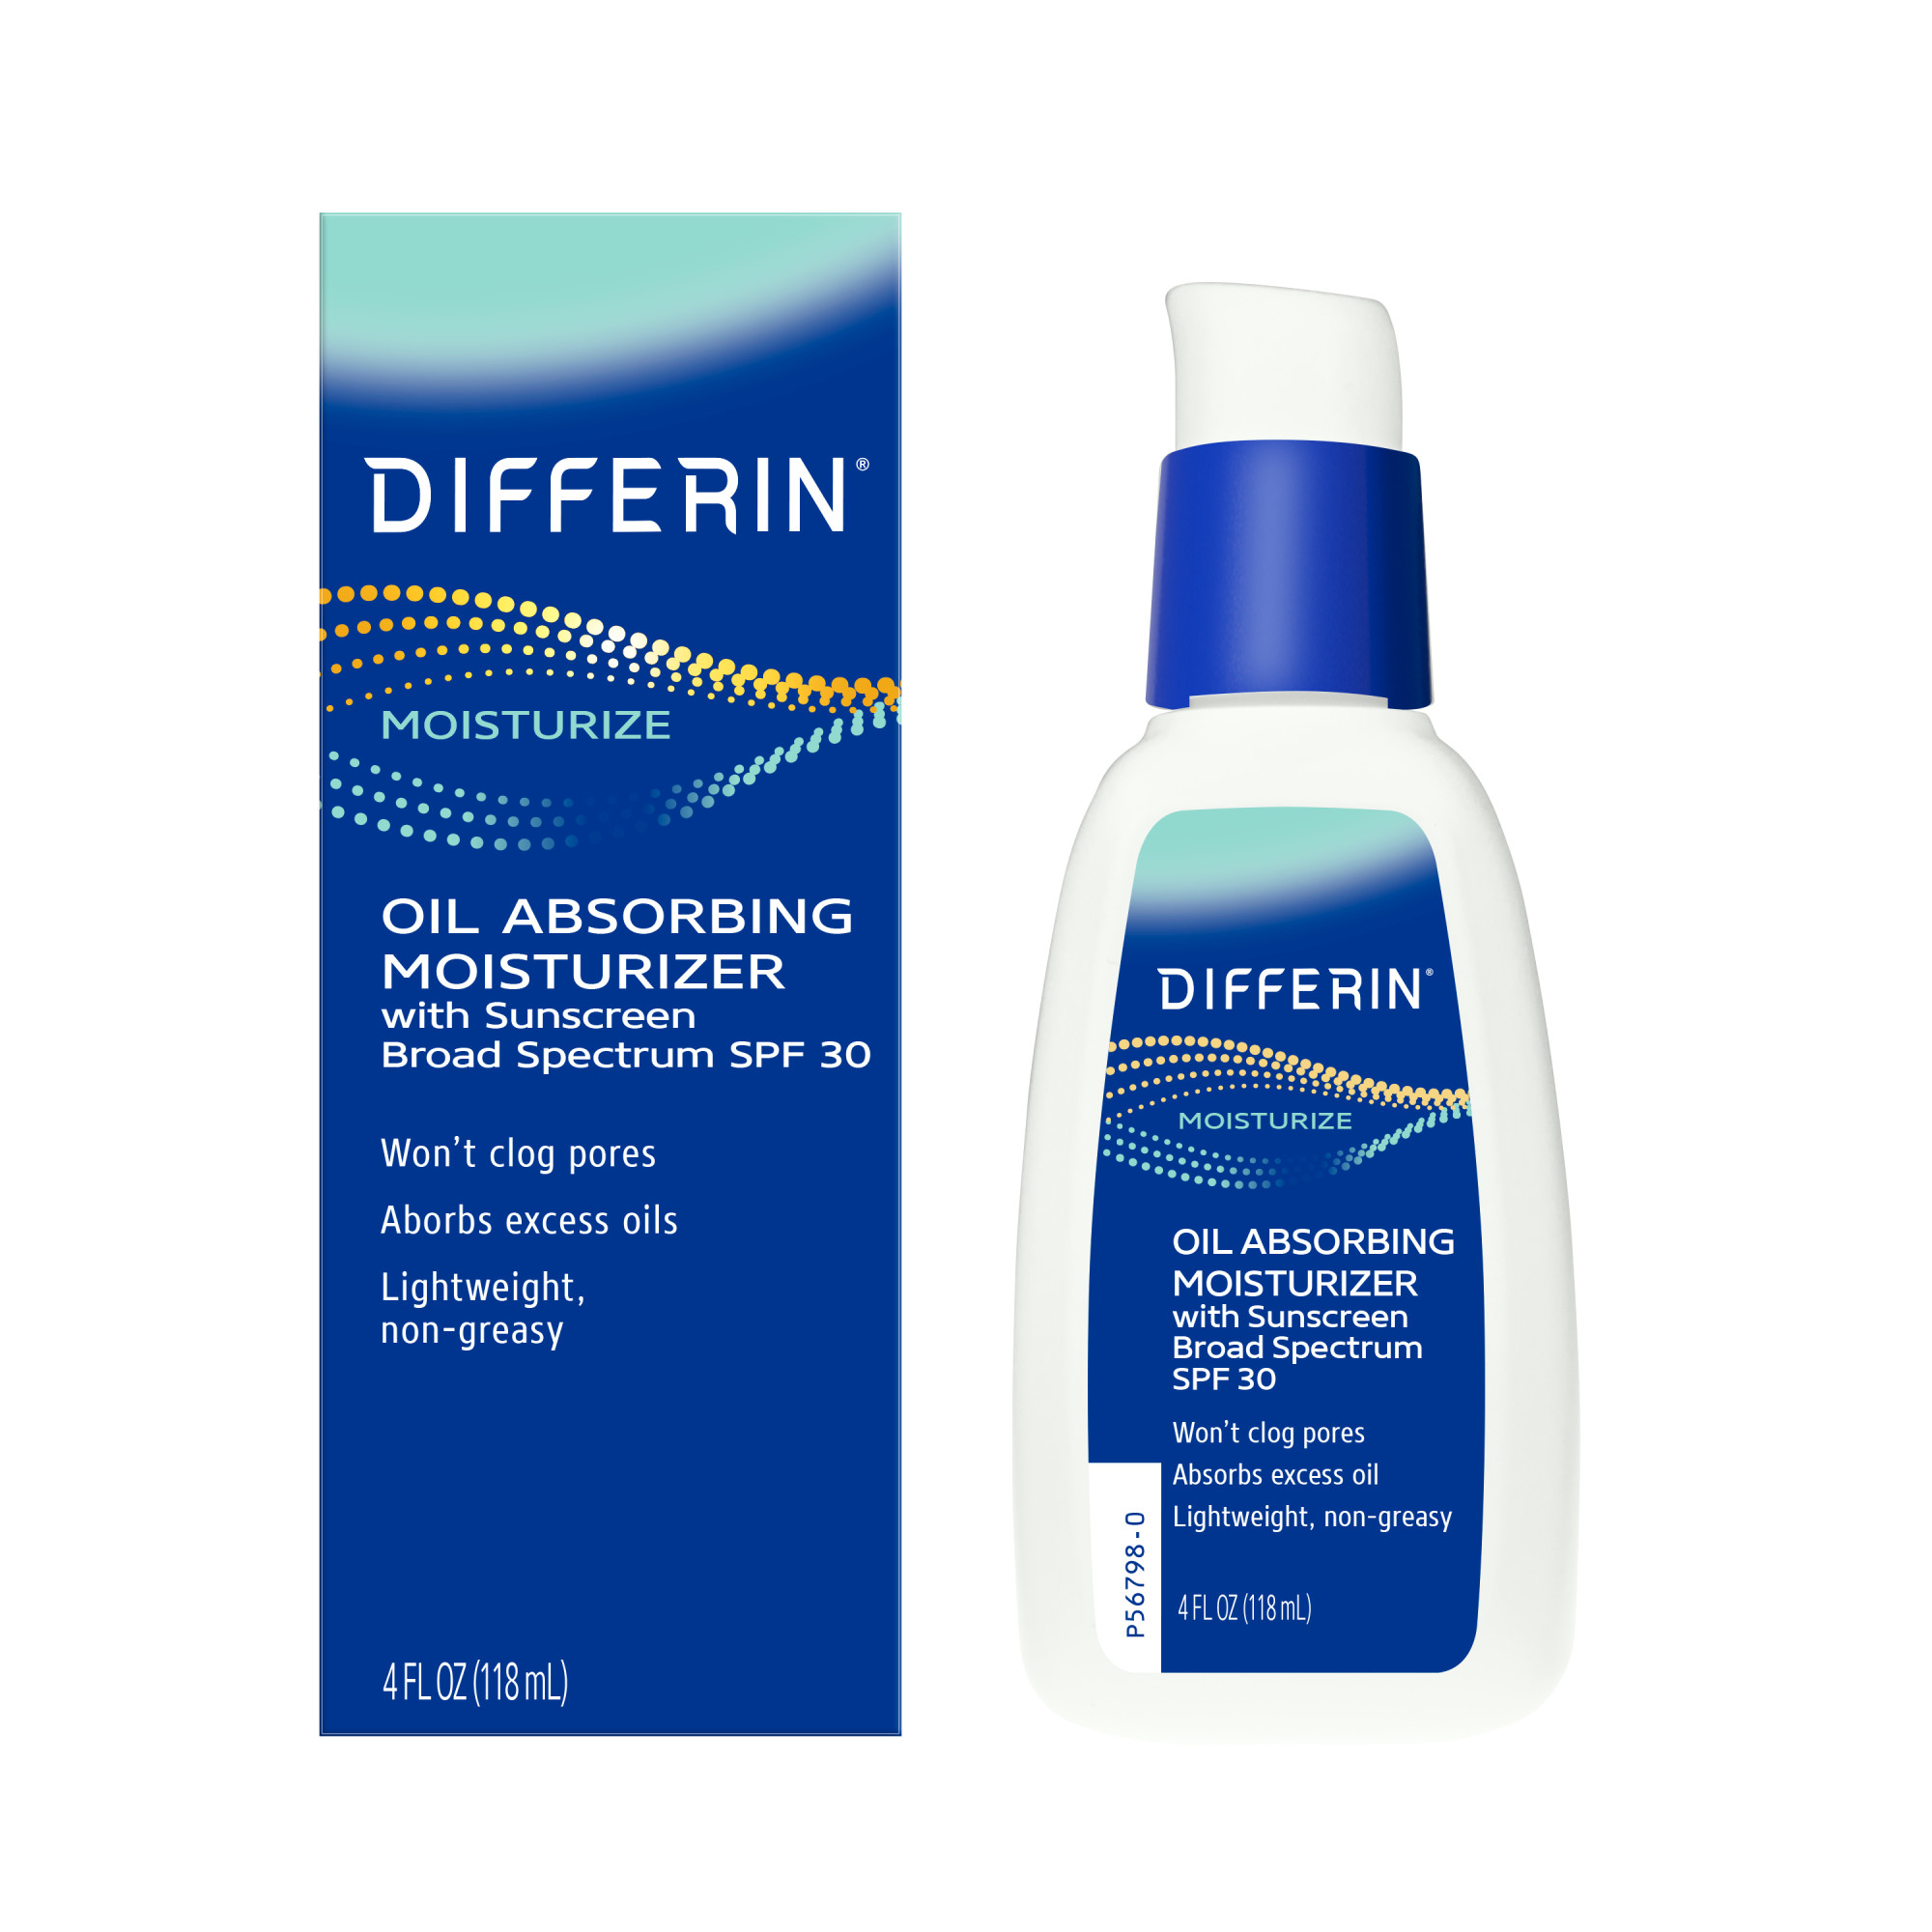 Differin Oil Absorbing Moisturizer with SPF30, Facial Moisturizer with Sun Protection, 4oz - image 1 of 7